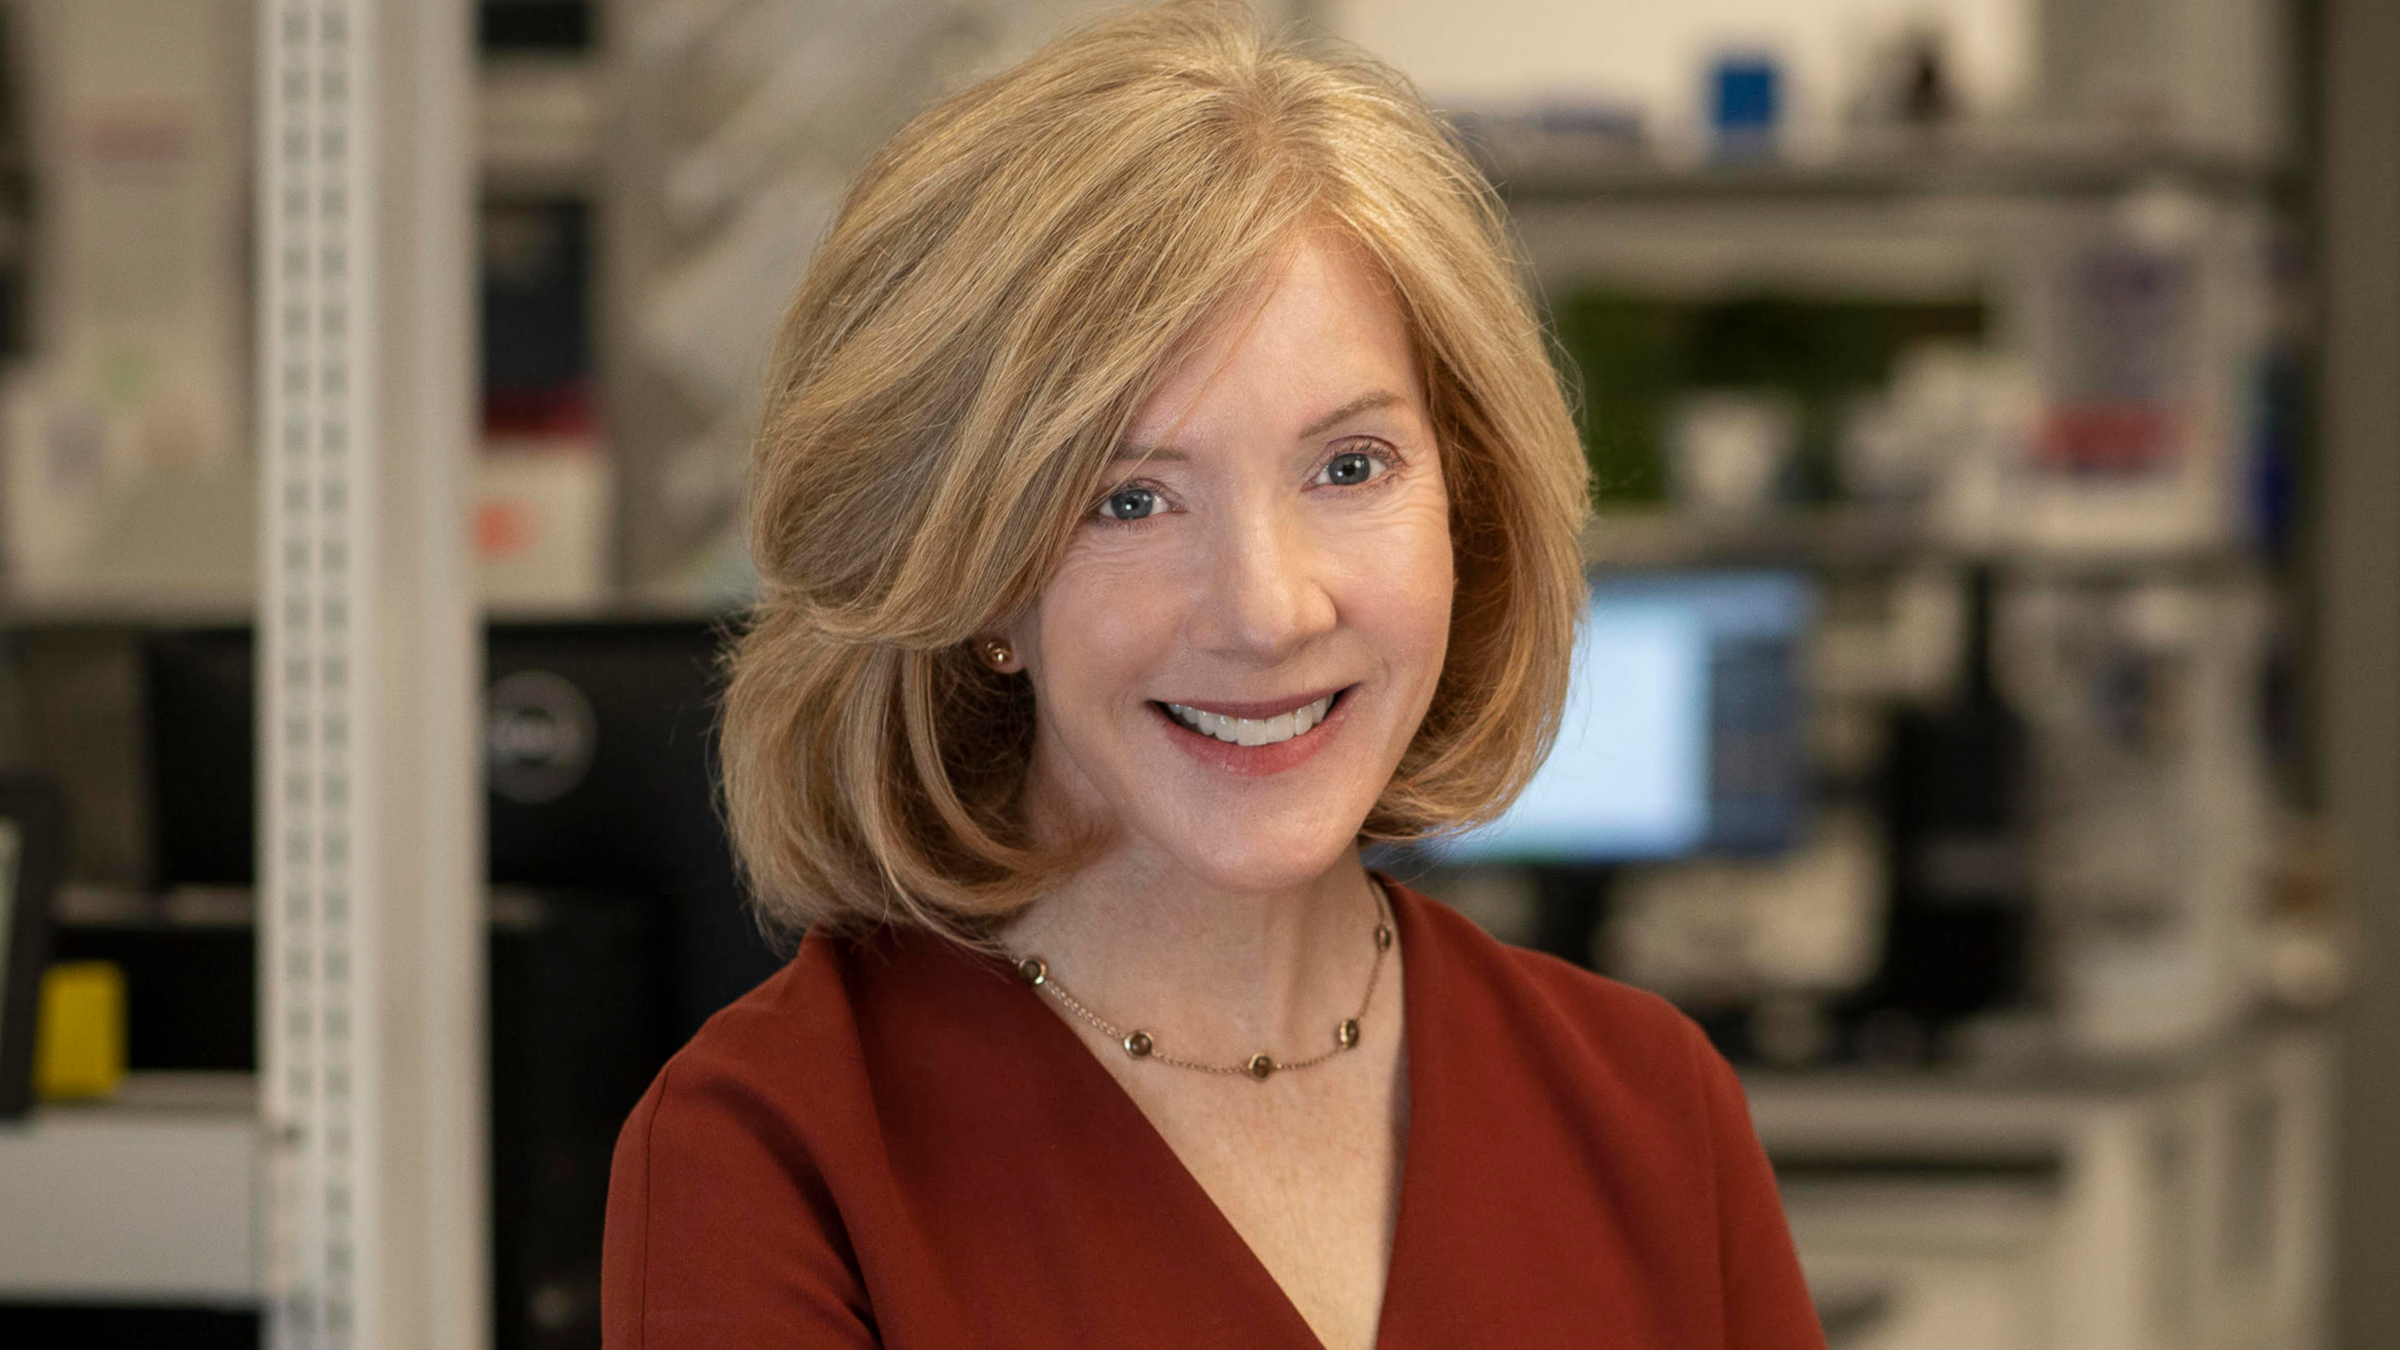 Cell therapy biotech from Stanford CAR-T leader Crystal Mackall nabs $200M for PhII